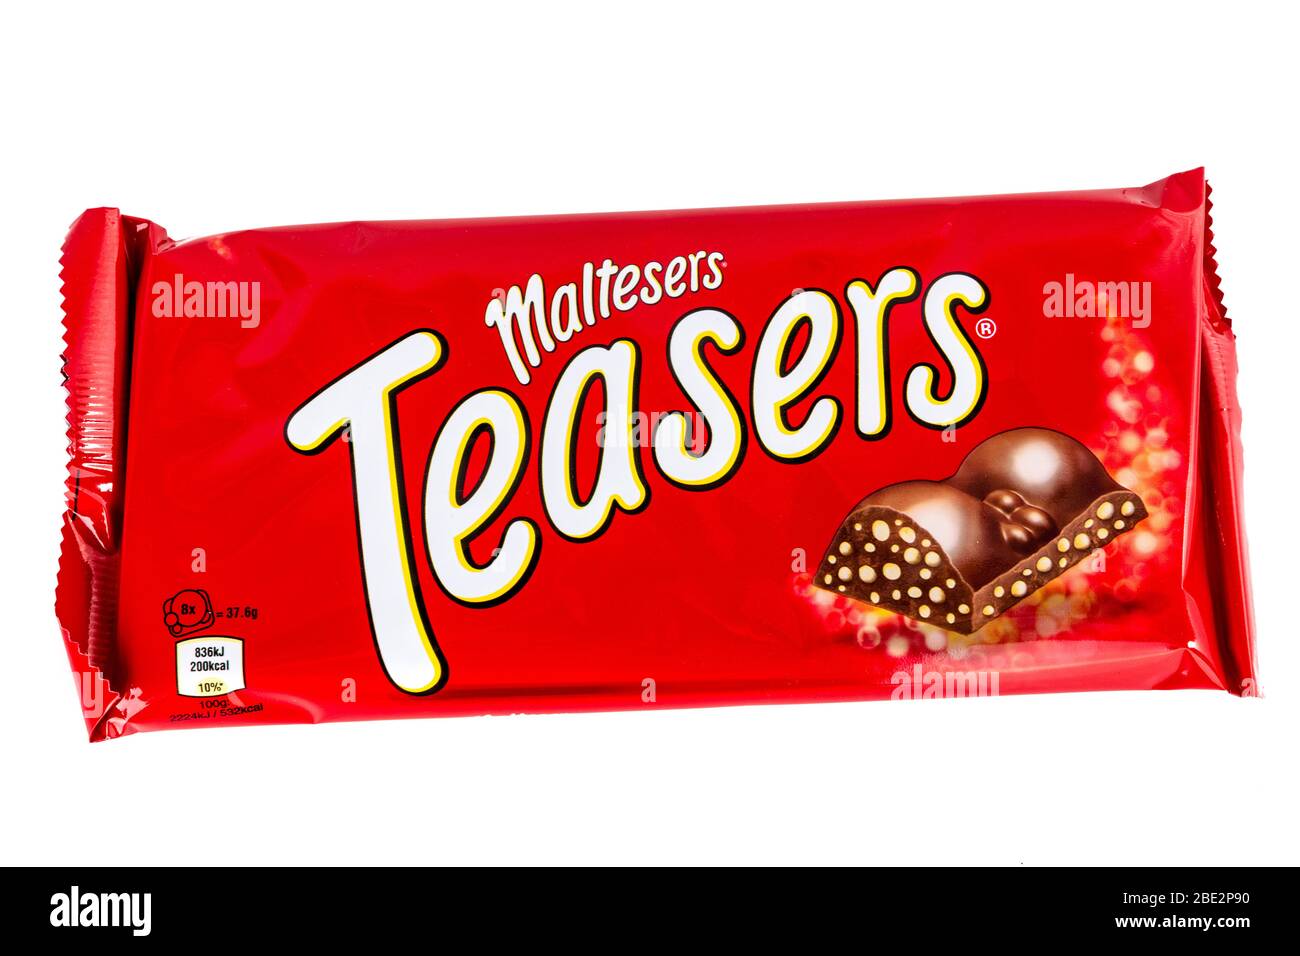 Maltesers Teasers chocolate bar, Mars brand, Confectionery